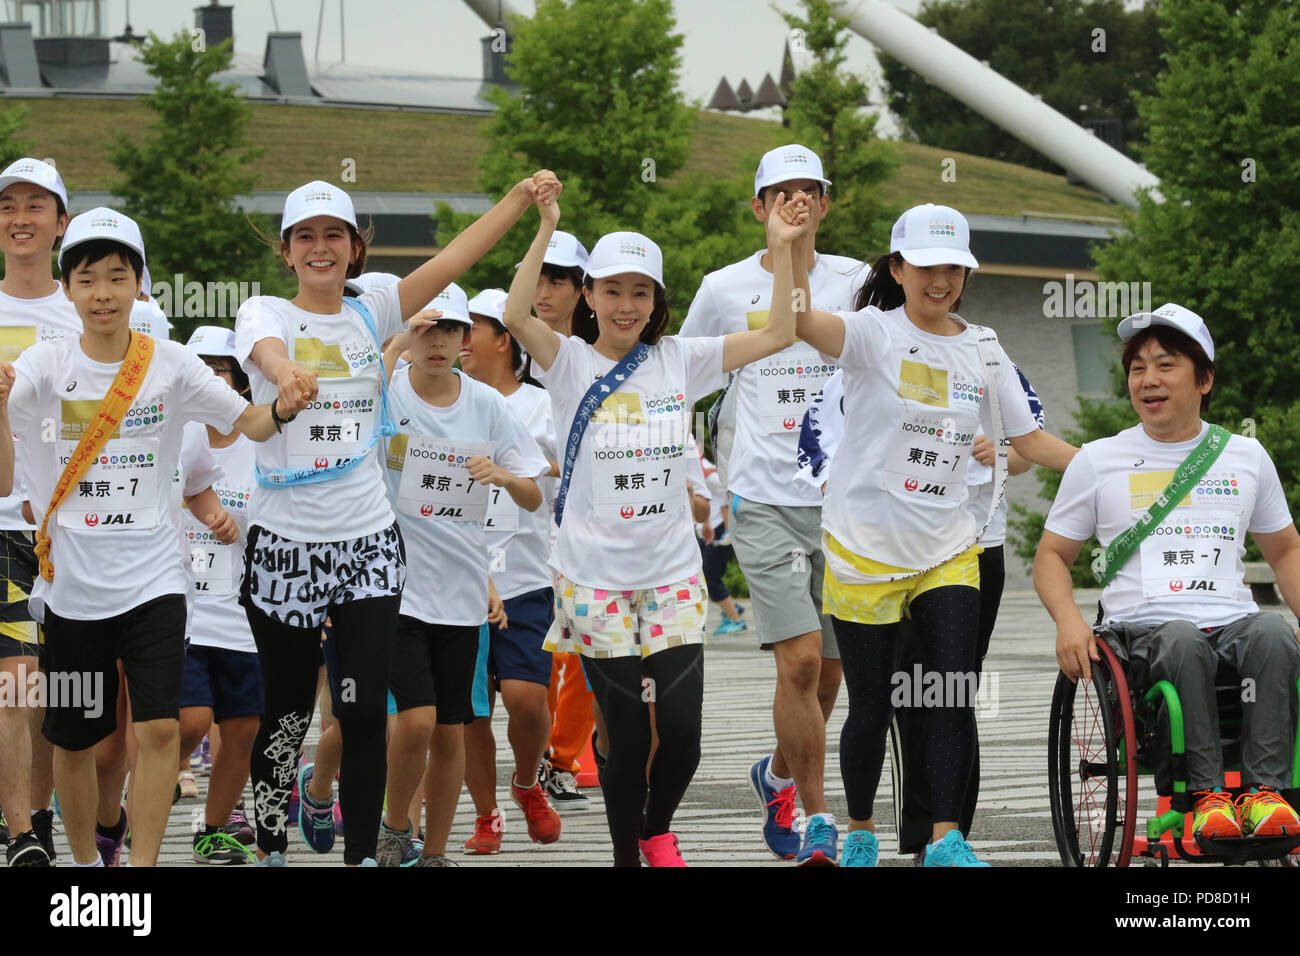 Tokyo, Japan. 7th Aug, 2018. (R-L) Japanese wheelchair basketball player Shinji Negi, Barcelona Olympics swimming gold medalist Kyoko Iwasaki, marathon runner Masako Chiba and TV personality Suzanne are on the way to finish line for the '1,000km relay to Tokyo' at the Komazawa stadium in Tokyo on Tuesday, August 7, 2018. Some 1,600 runners participated the marathon relay from Aomori to Tokyo for the commemoration of the 3.11 East Japan Great Earthquake. Credit: Yoshio Tsunoda/AFLO/Alamy Live News Stock Photo